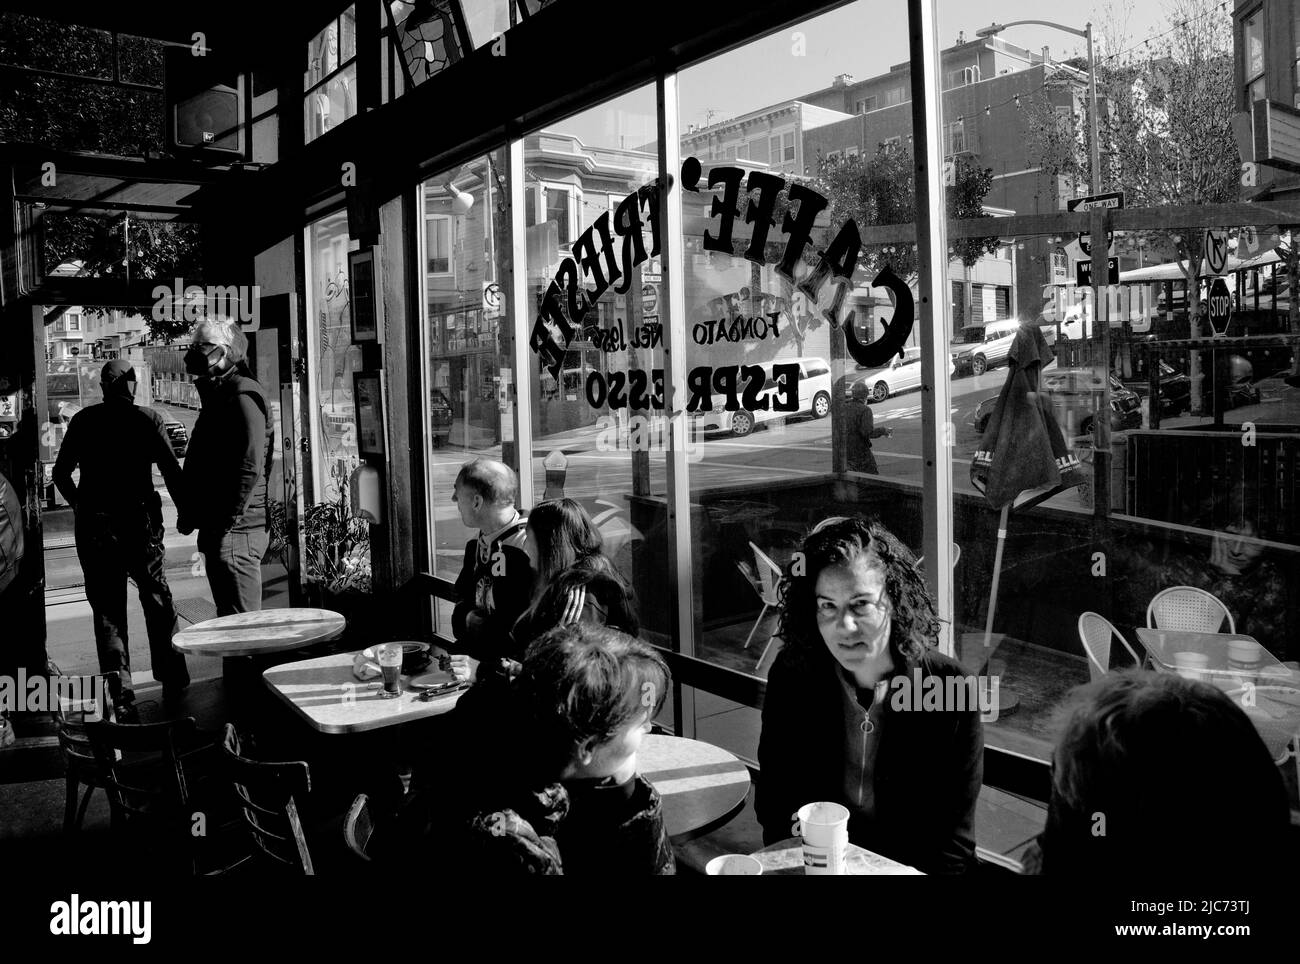 Customers enjoy coffee, espresso and pastries at the iconic Caffe Trieste in the Little Italy district of San Francisco, California. Stock Photo